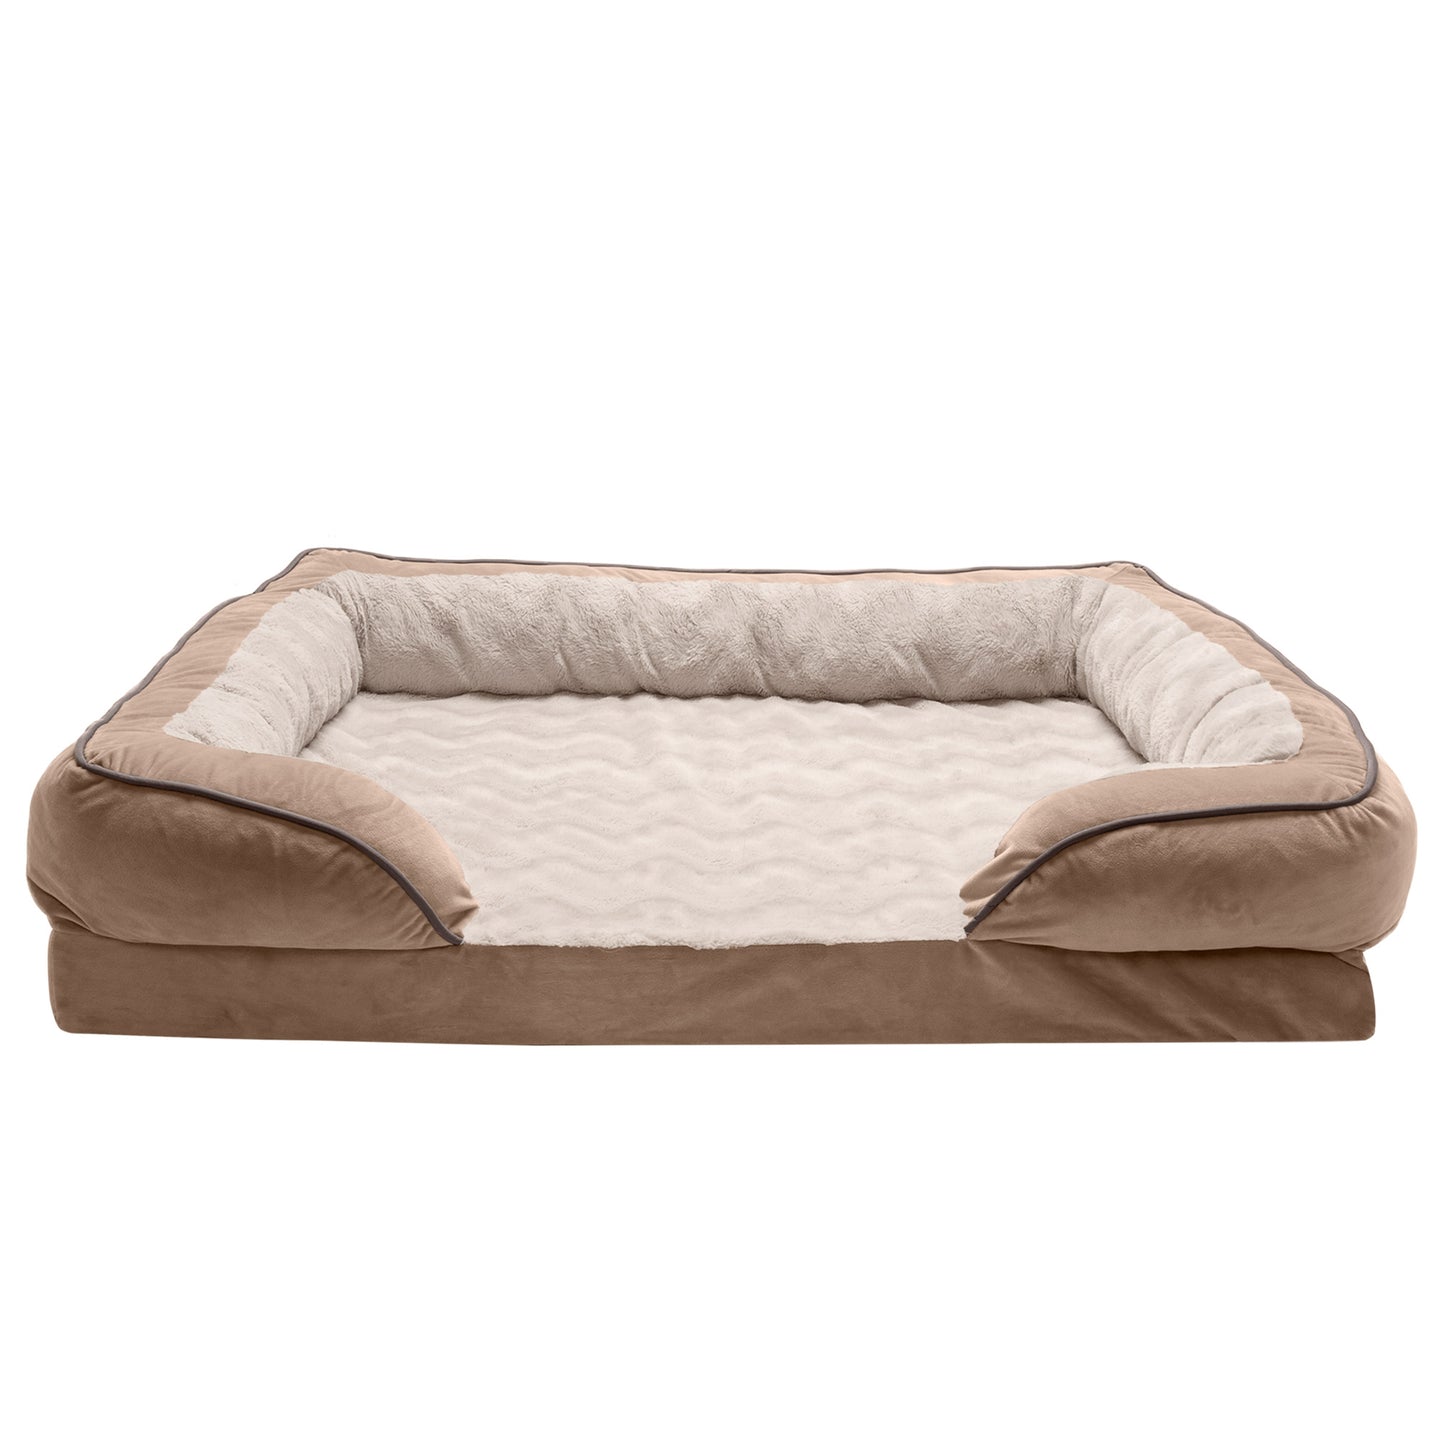 Full Support Perfect Comfort Velvet Waves Sofa-Style Pet Bed